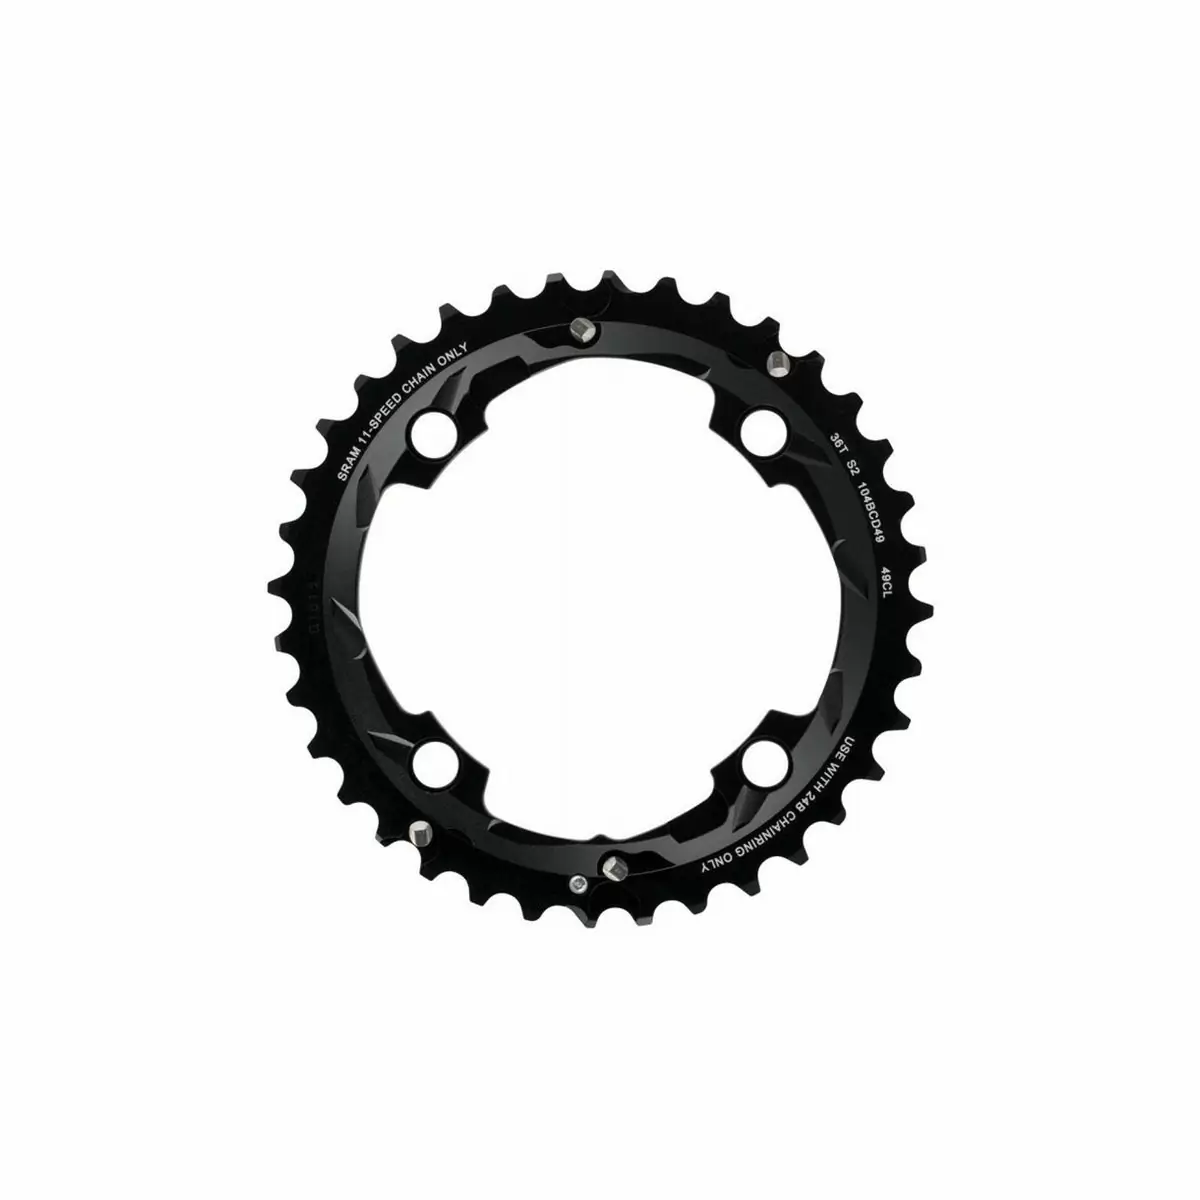 Chainring 36t GX 2x11s bcd 104 - image